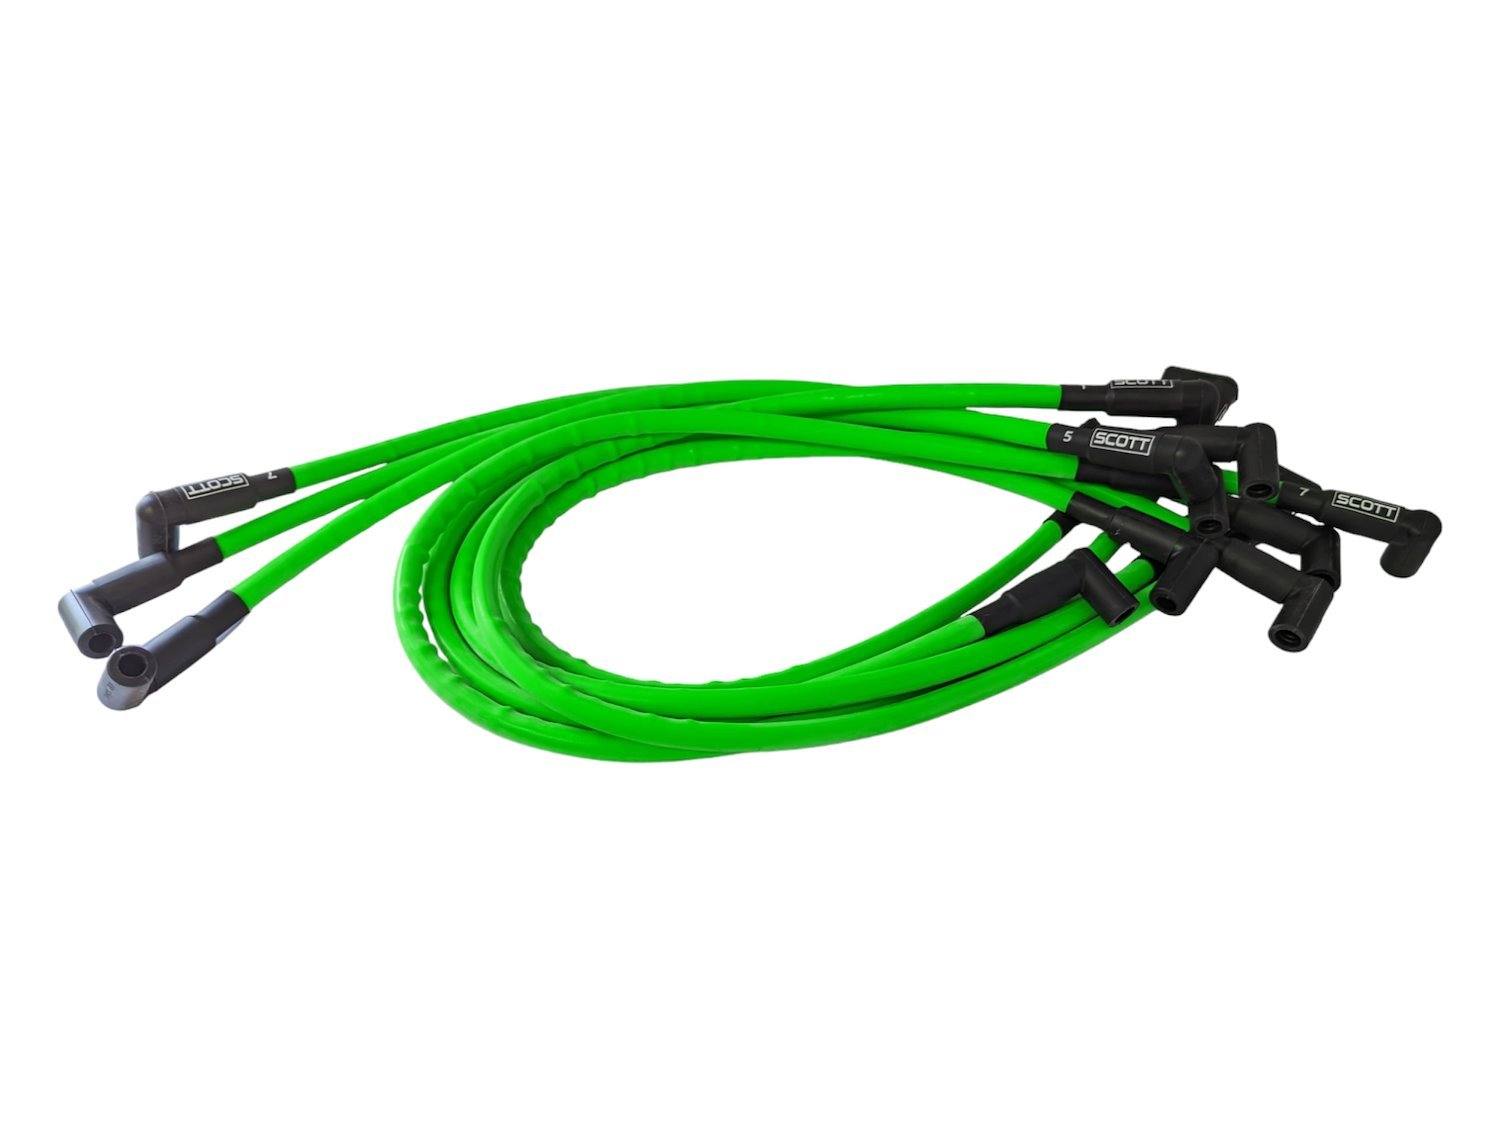 SPW-CH-416-8 High-Performance Silicone-Sleeved Spark Plug Wire Set for Big Block Chevy, Under Header [Fluorescent Green]